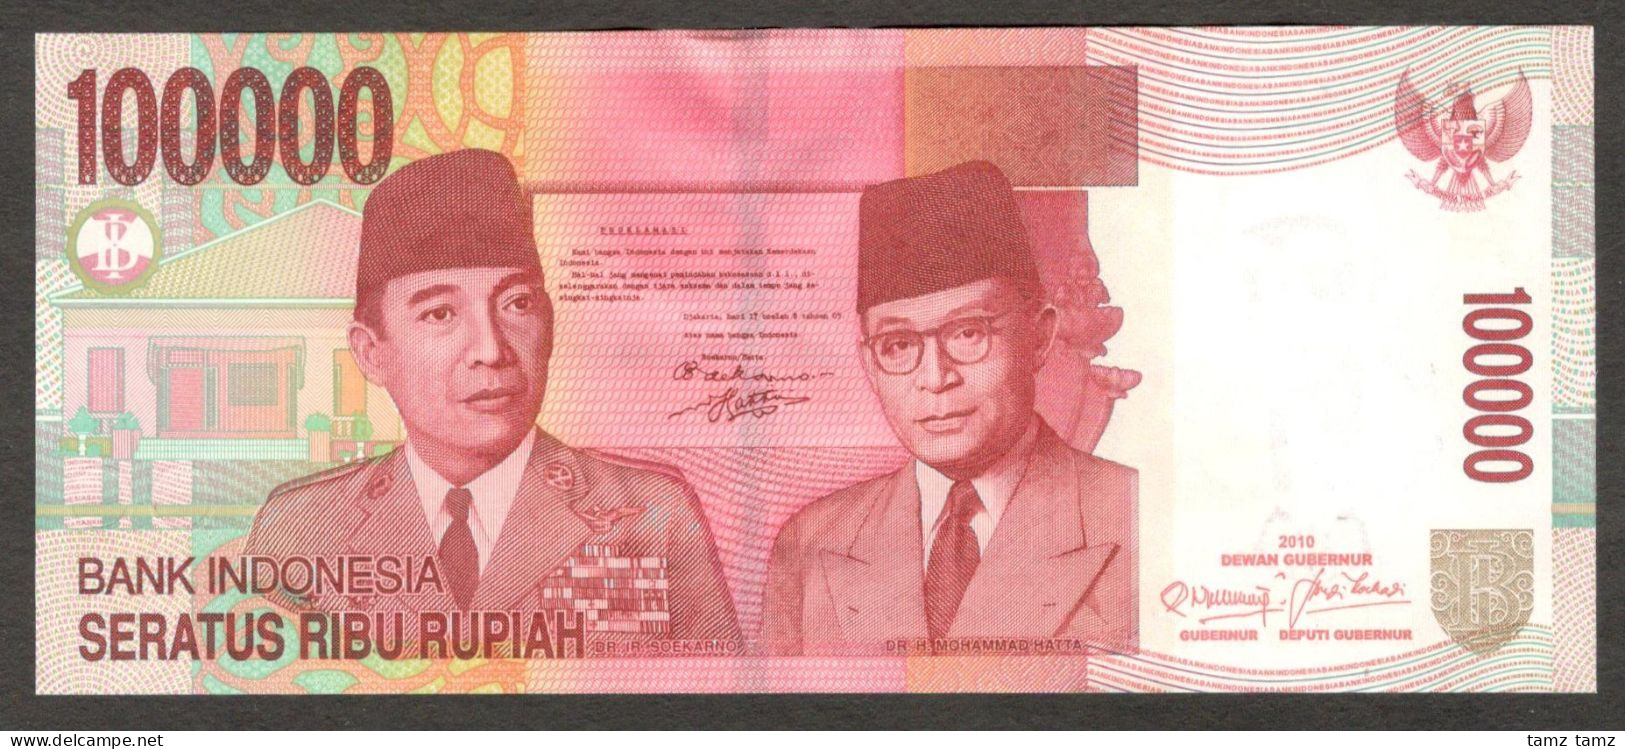 Indonesia 100000 100,000 Rupiah Replacement W/o Omron Rings P-146g* 2010/2004 UNC - Indonésie